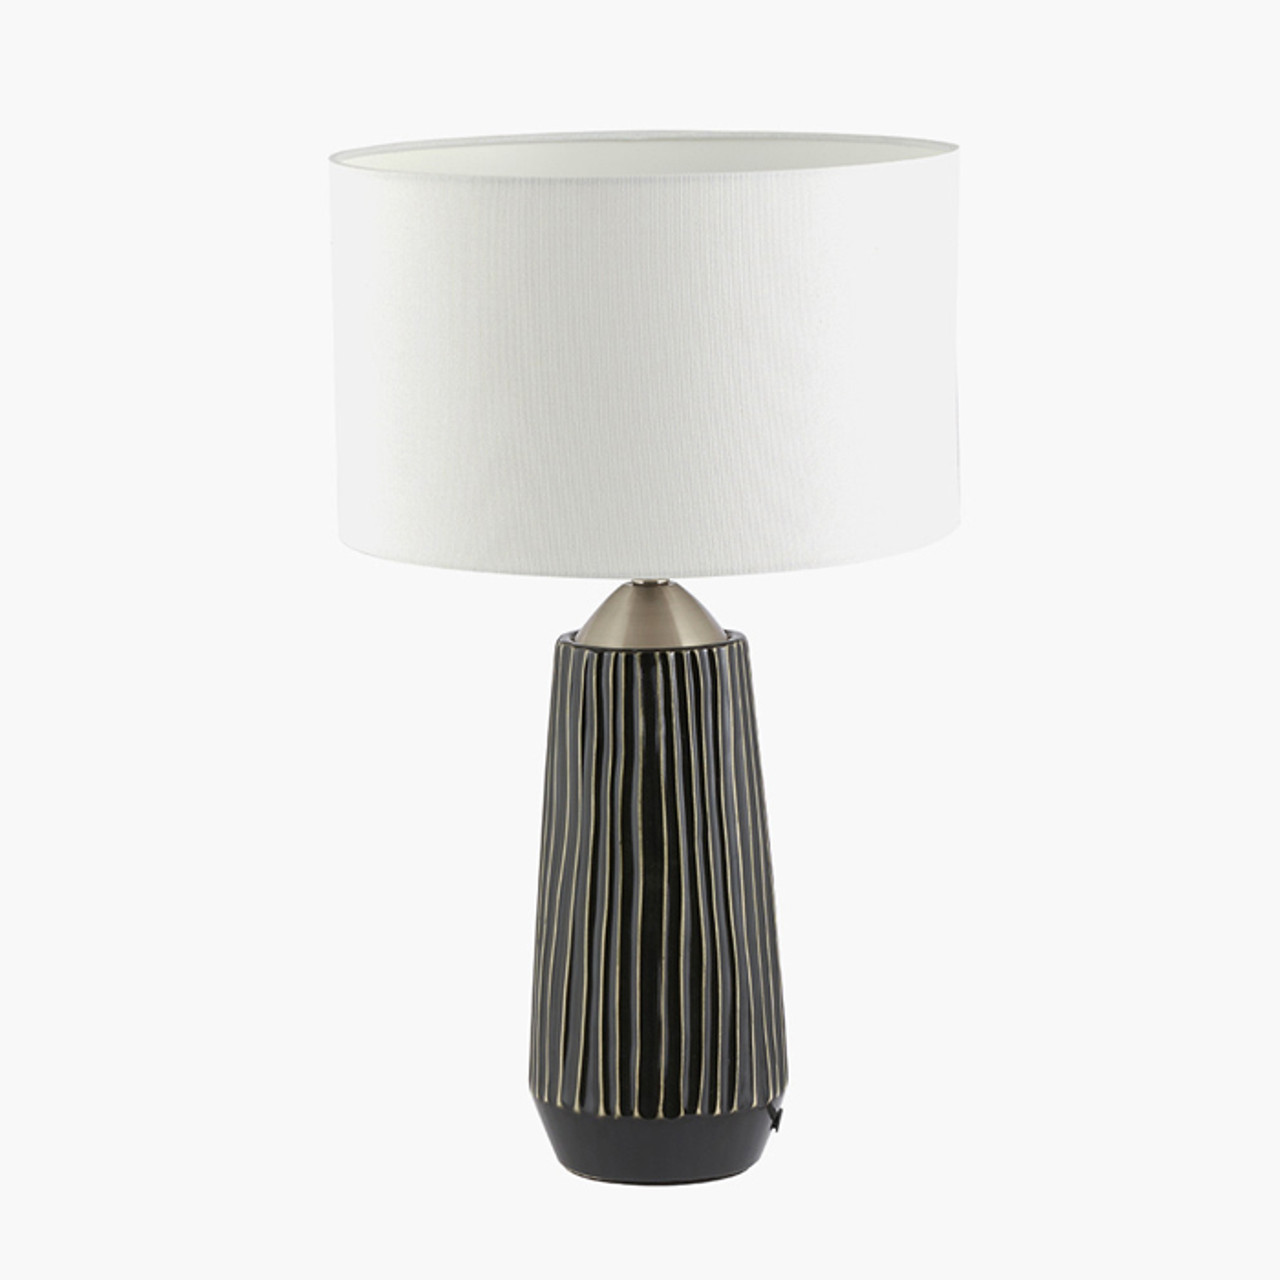 Artemis Black Textured Ceramic and Brushed Silver Tall Table Lamp *in-store